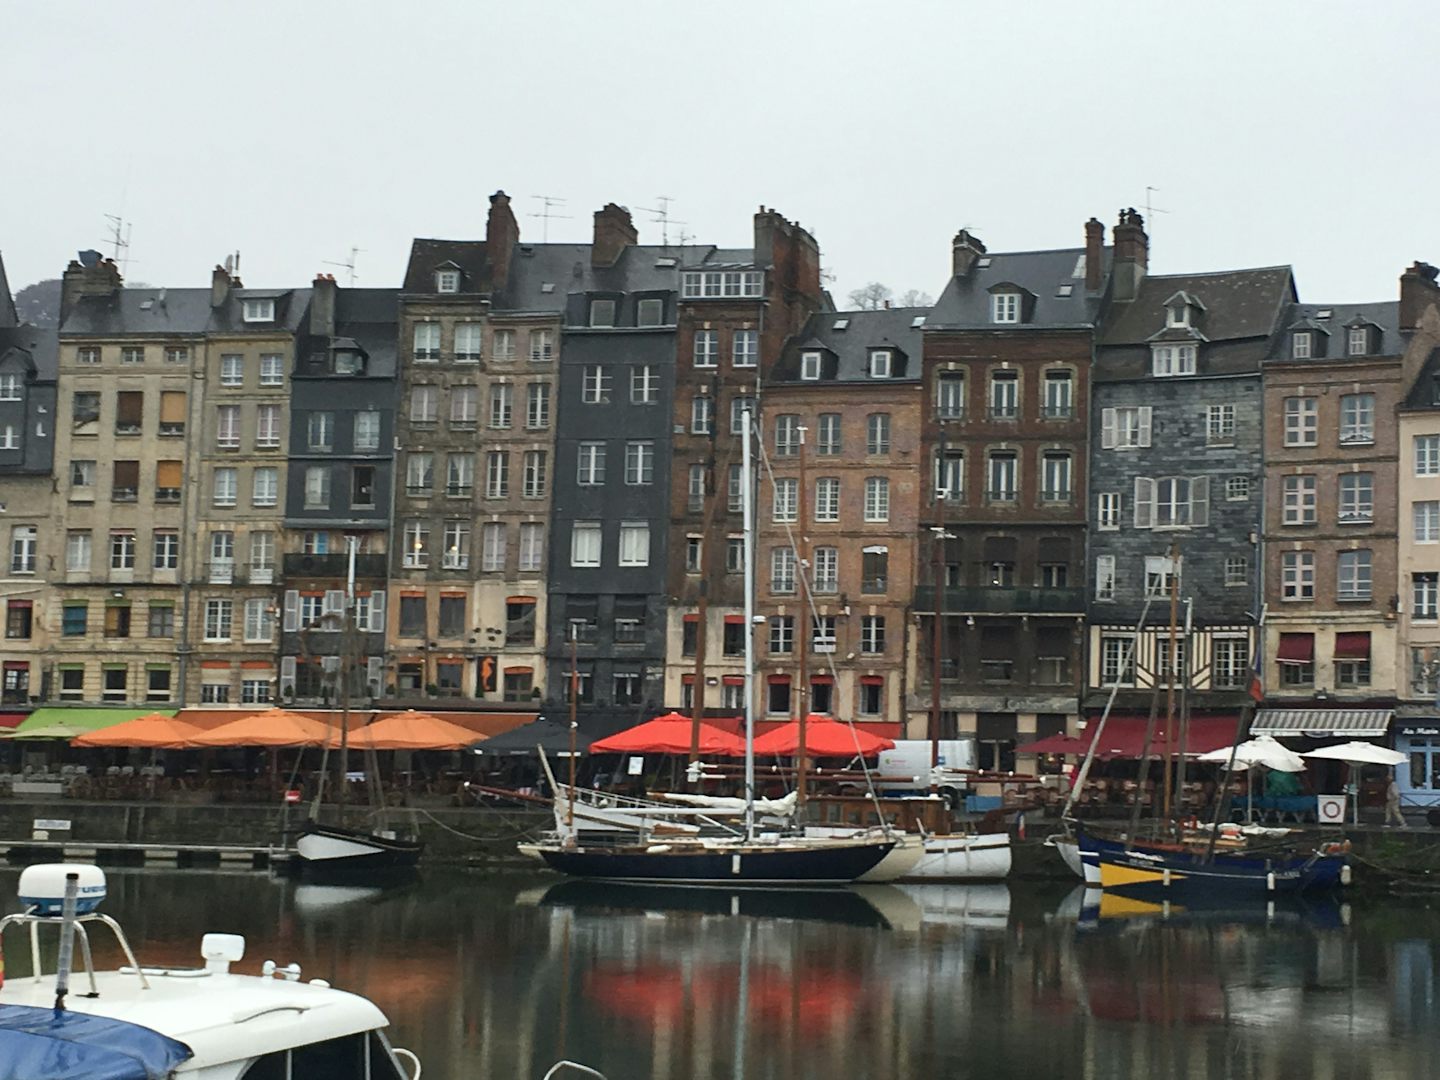 The view as we lunched in beautiful Honfleur